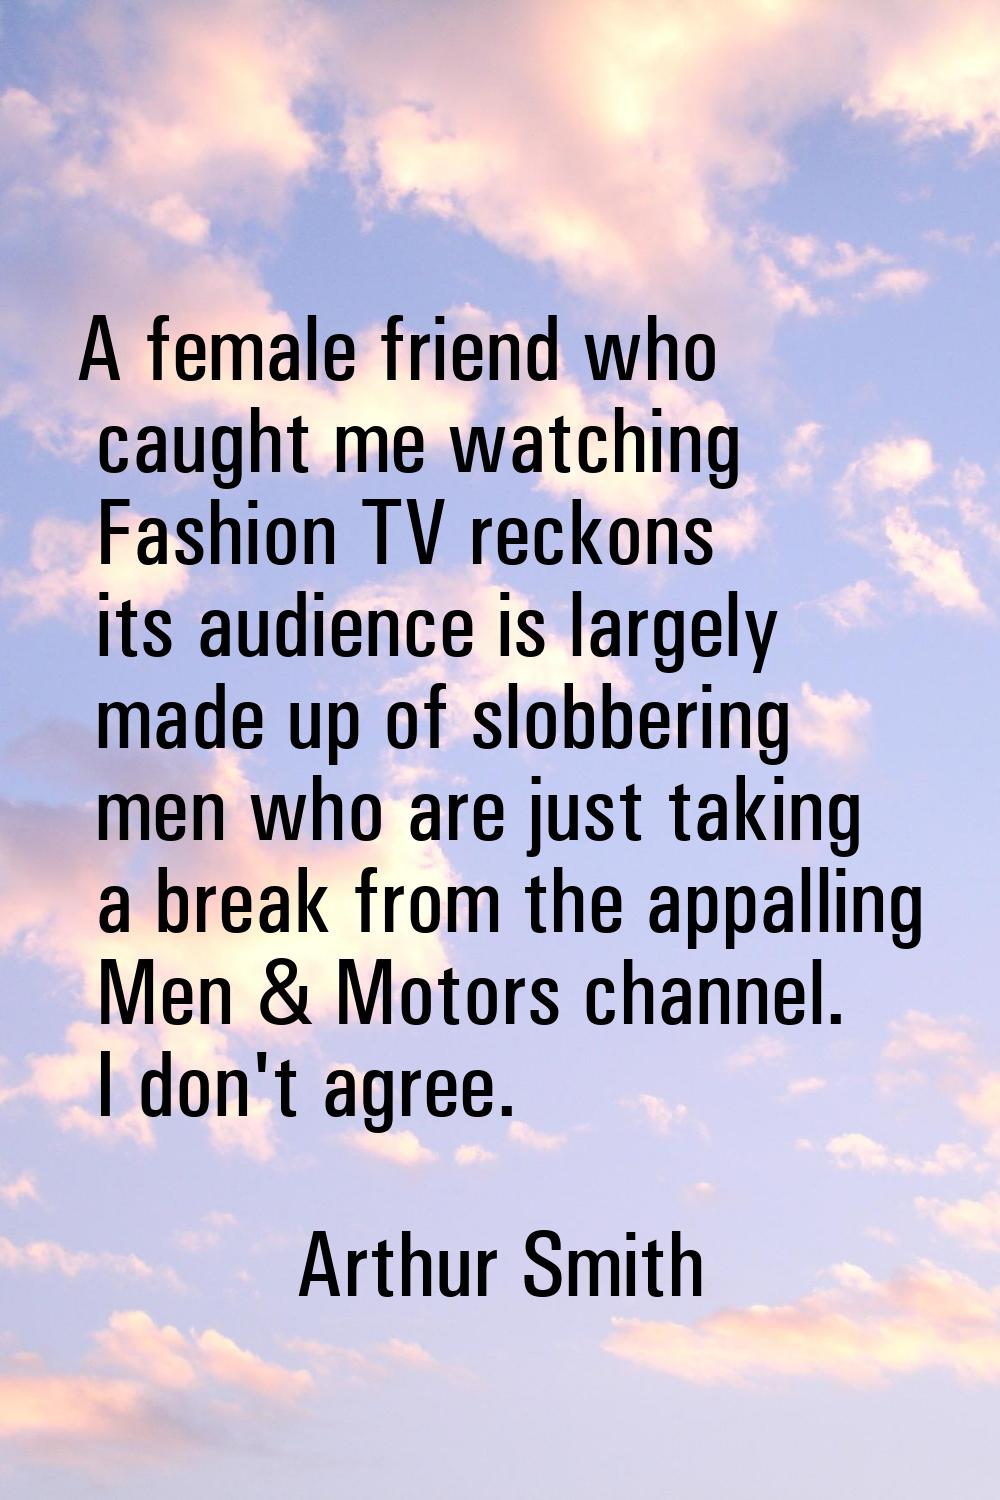 A female friend who caught me watching Fashion TV reckons its audience is largely made up of slobbe